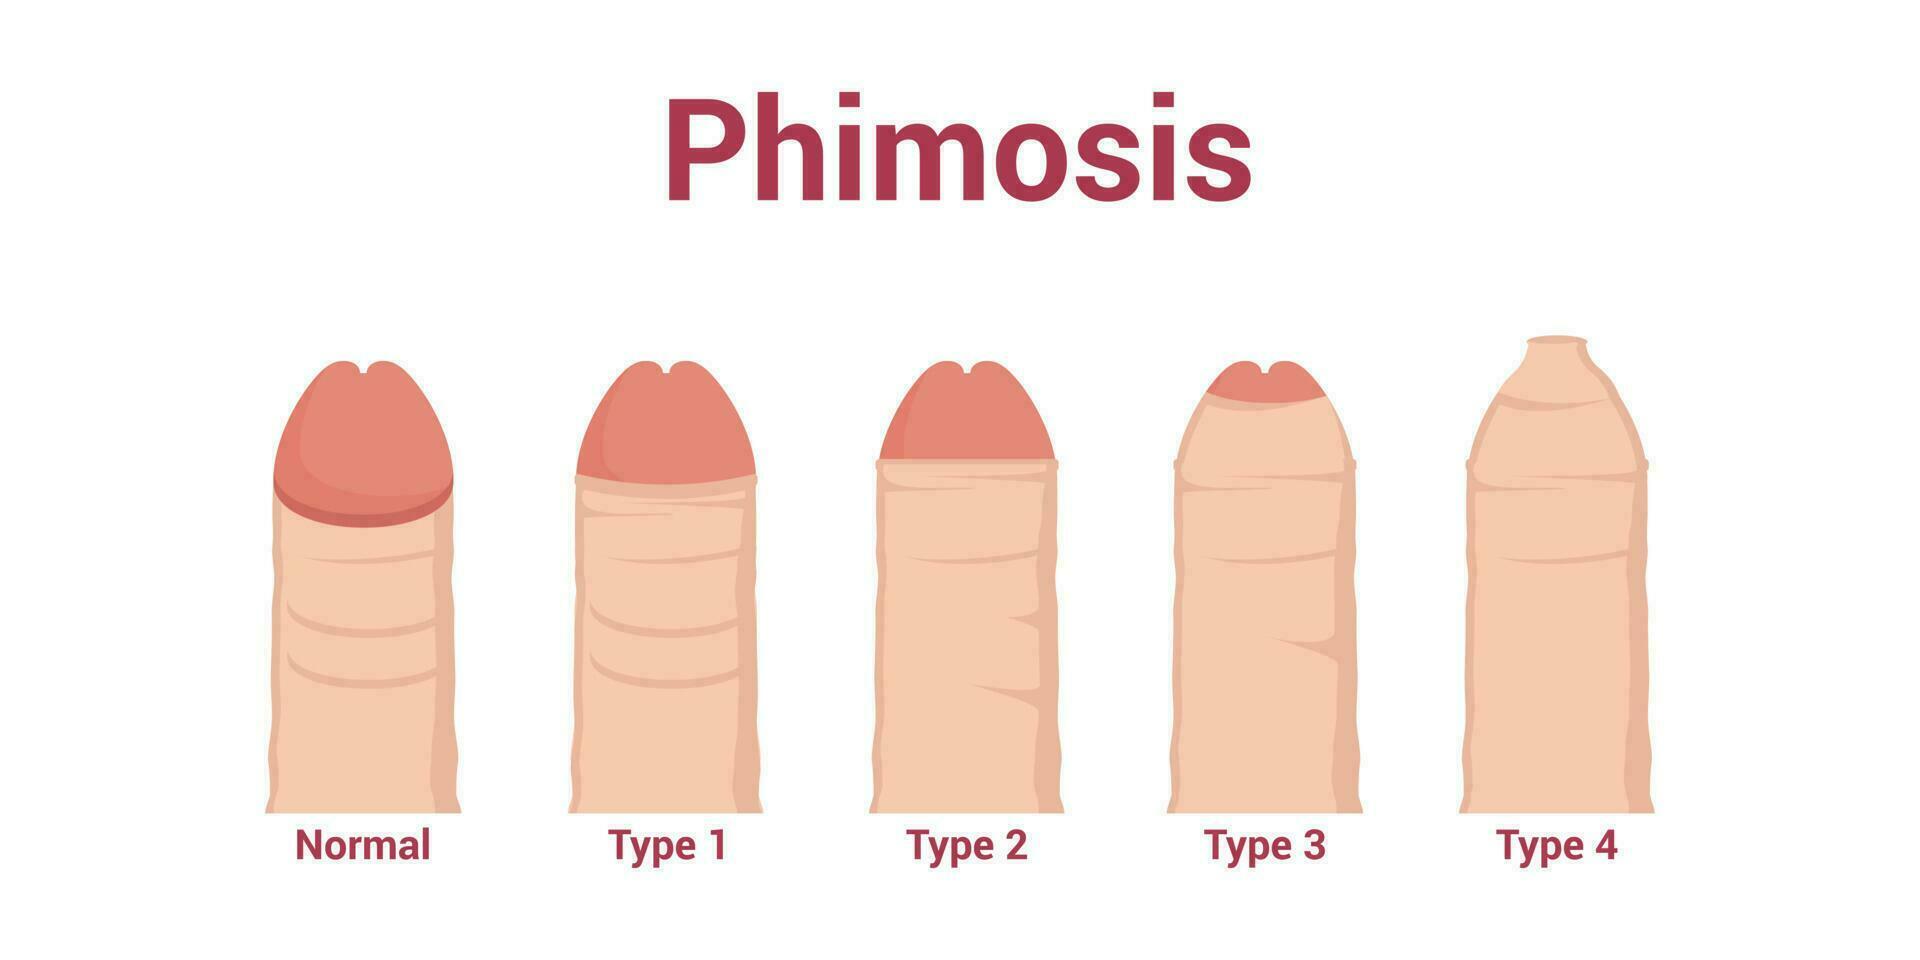 Types of phimosis. Inability to retract the foreskin covering the